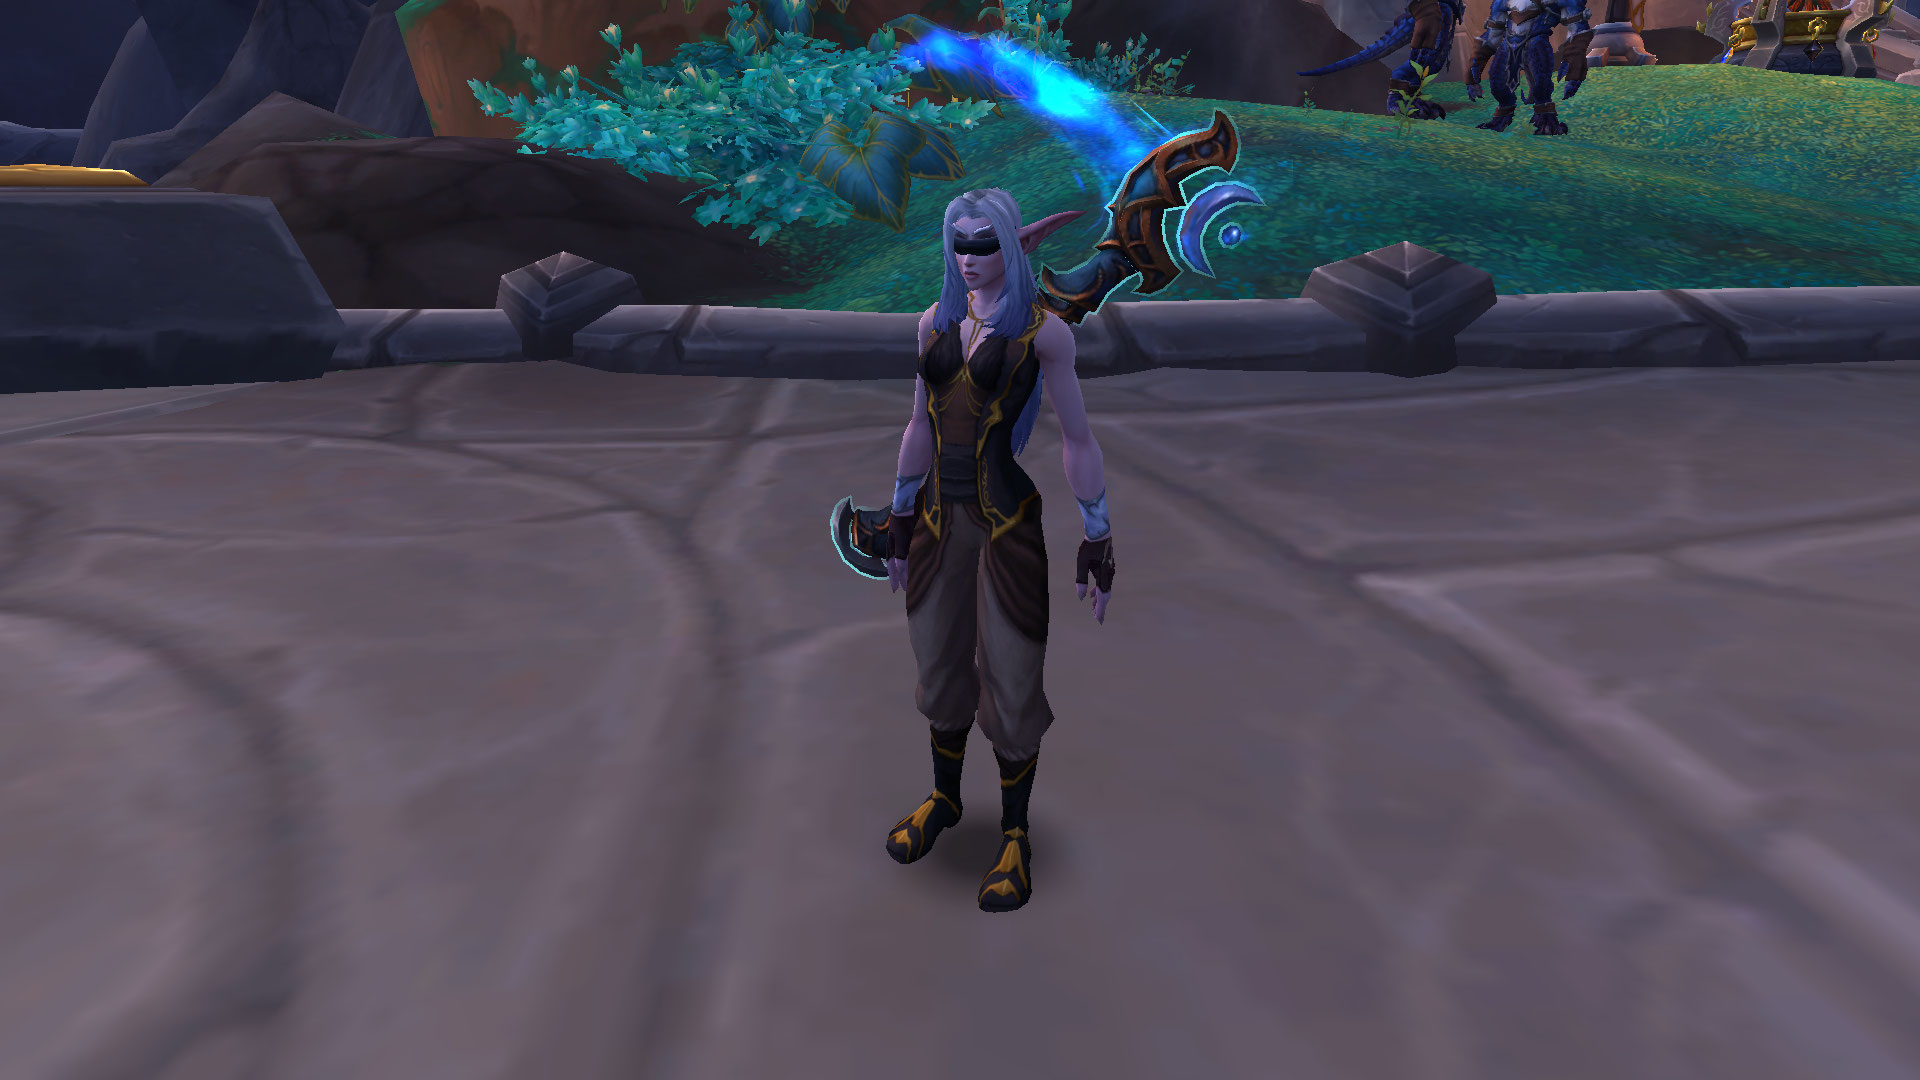 WoW night elf in a bandage and with a scythe